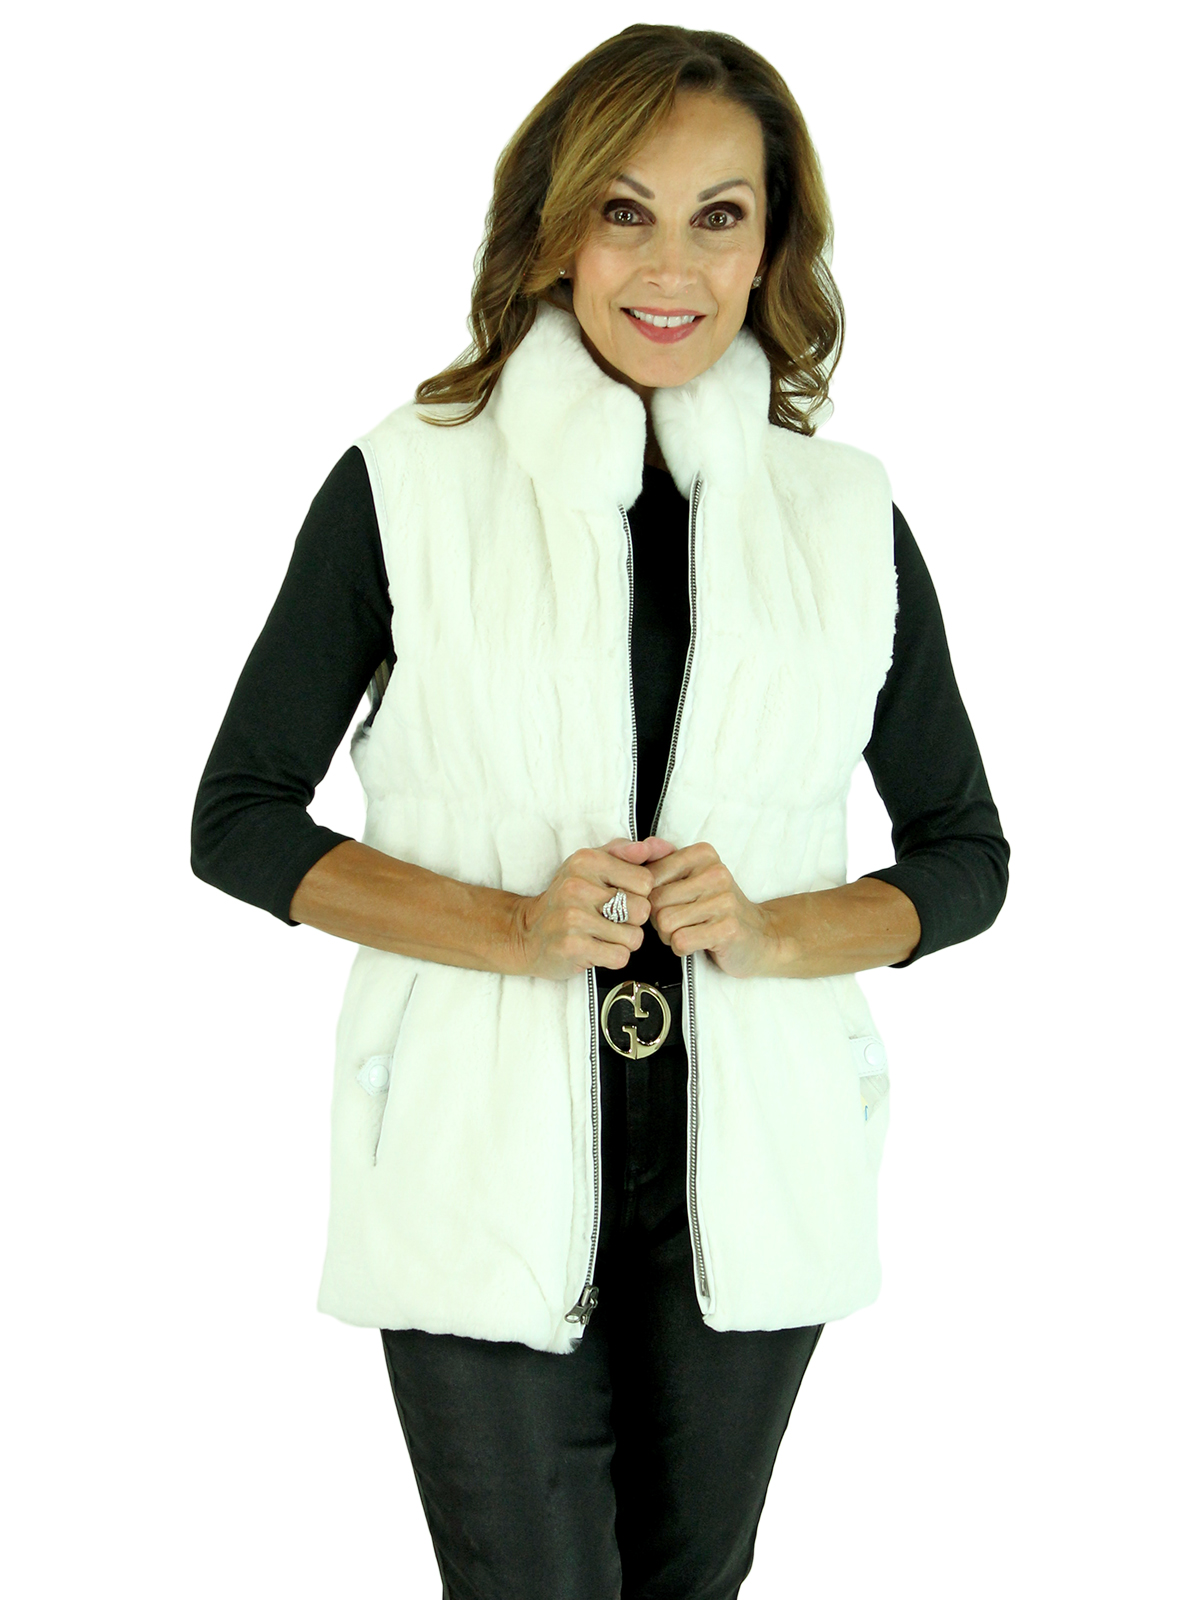 Woman's White Sheared Rex Rabbit Fur and Knit Vest Reveres to White Leather and Knit